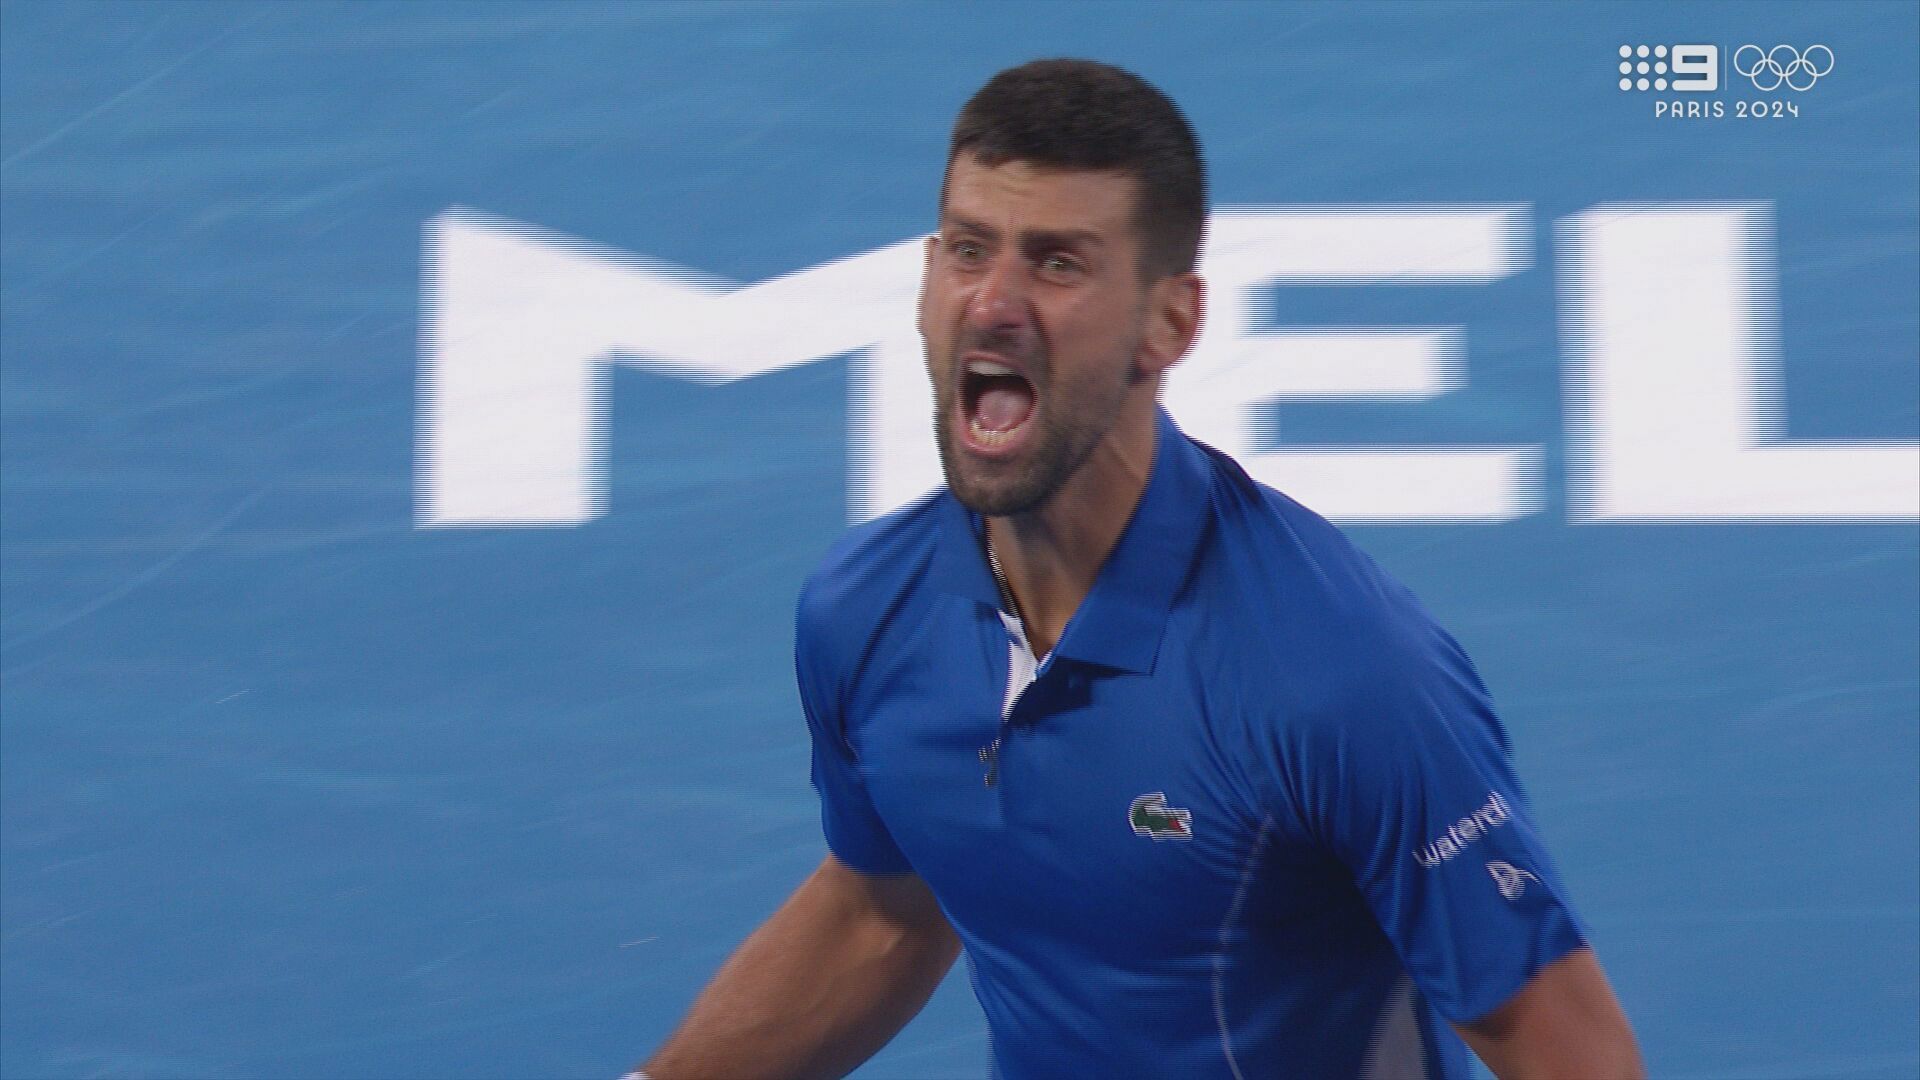 Novak Djokovic screams at the grandstands after defeating Alexei Popyrin having earlier had a confrontation with one fan.